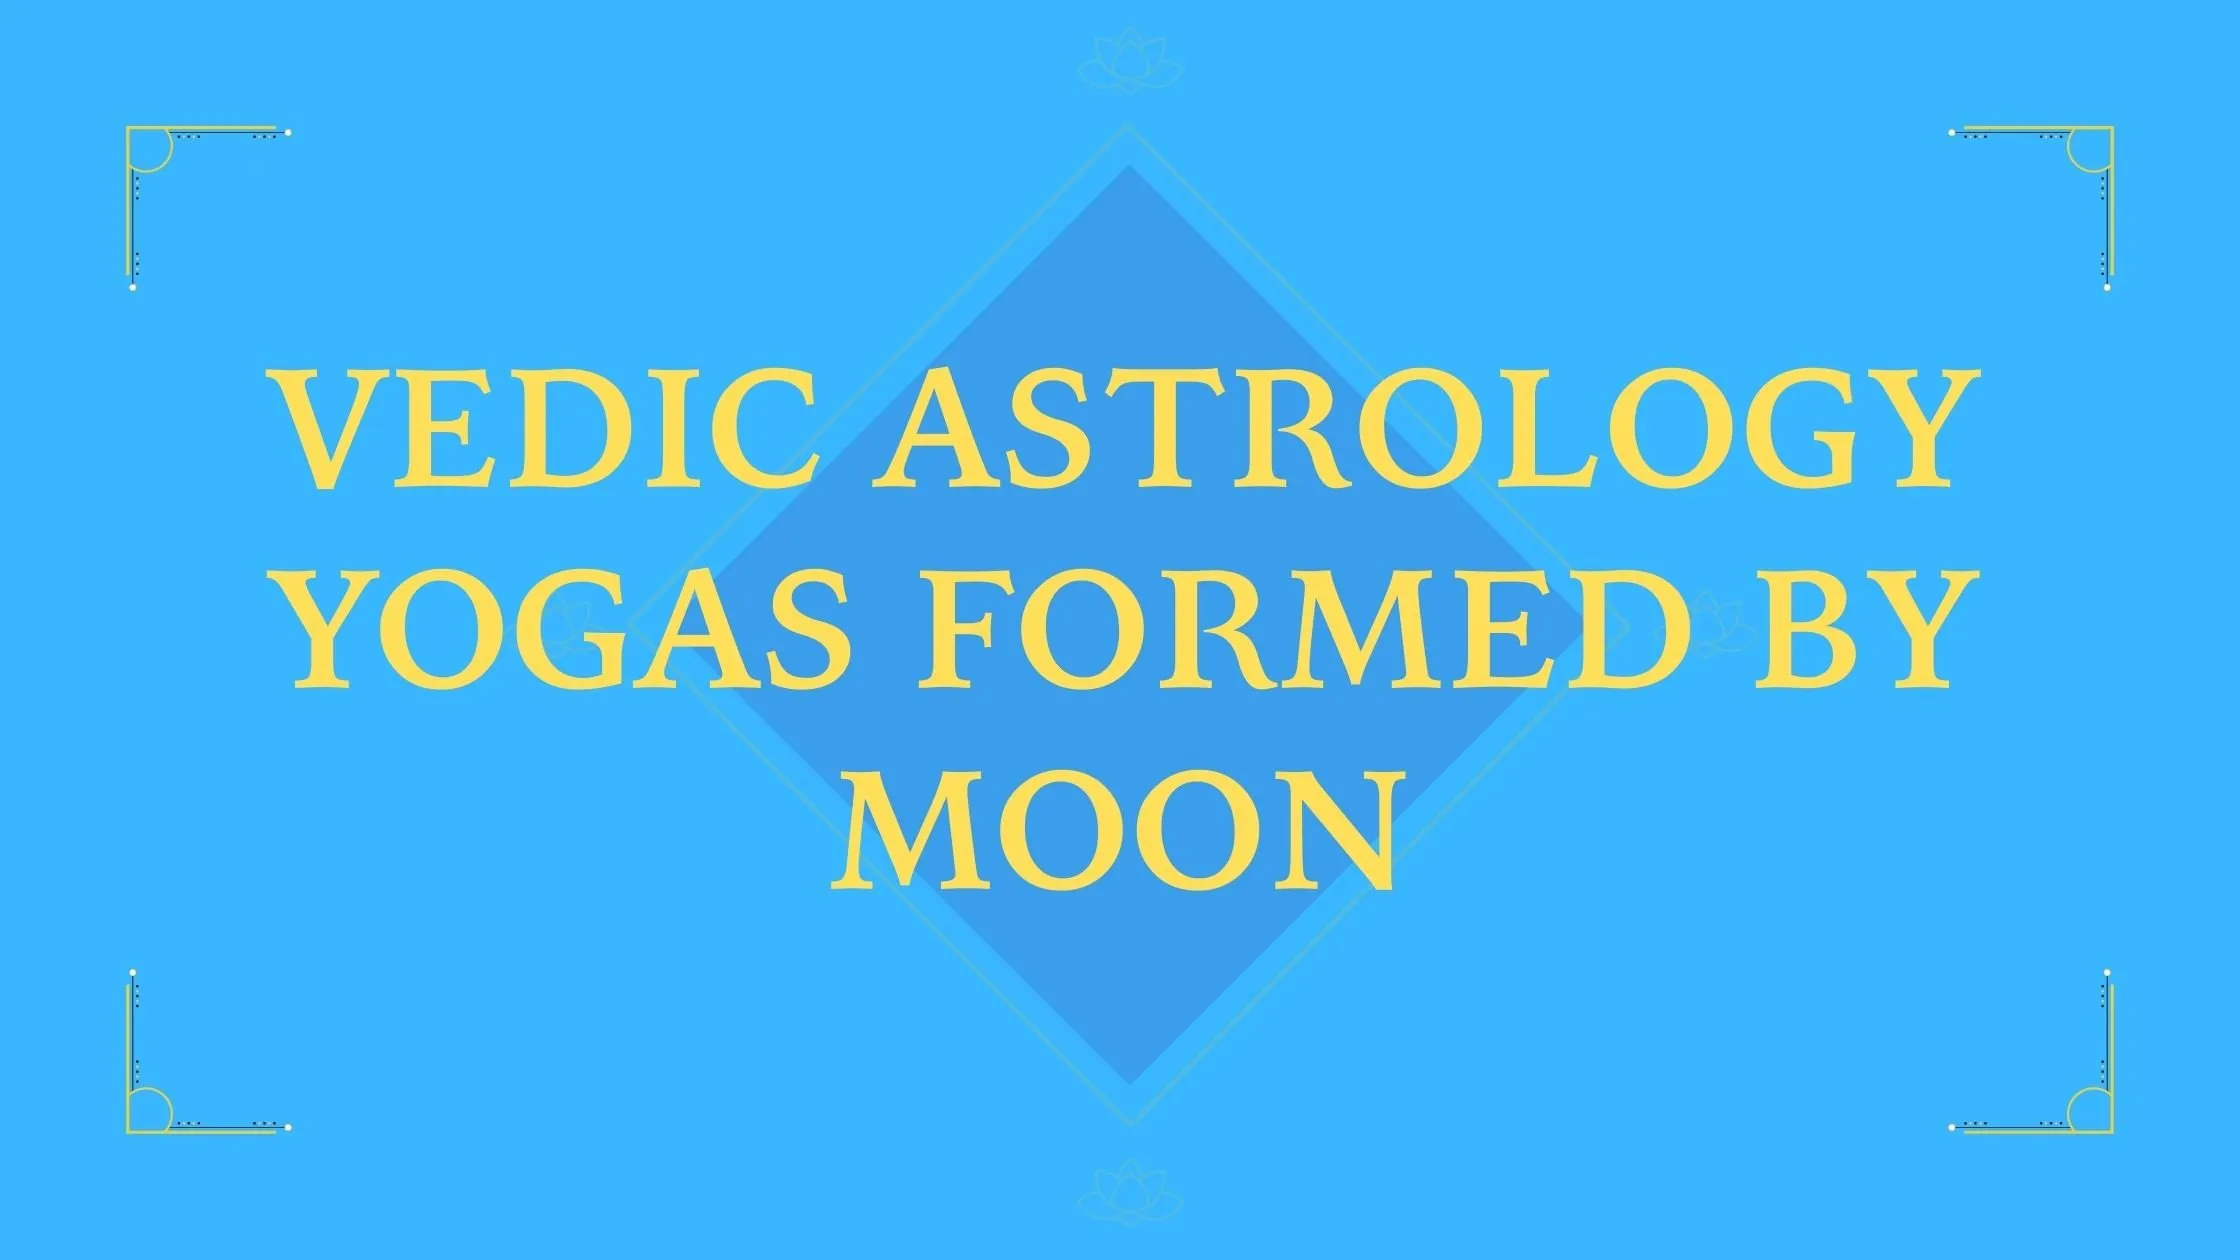 Vedic AStrology yogas formed by moon